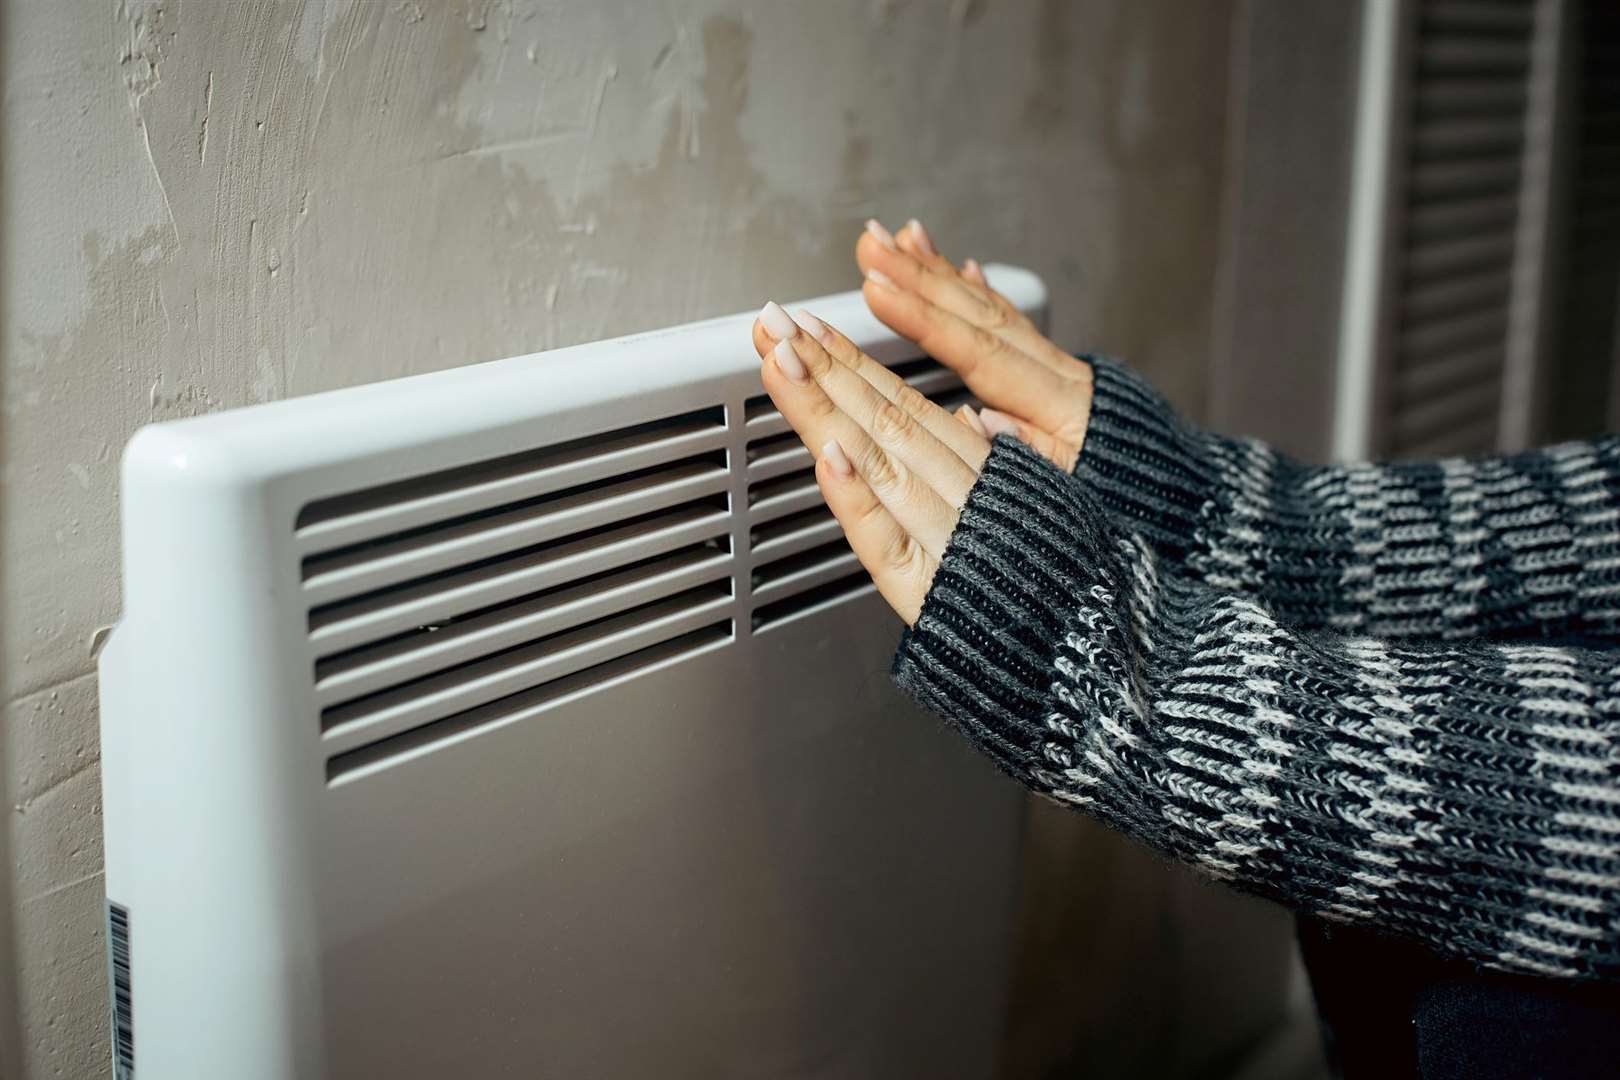 Money is available to help pay the heating when temperatures hit freezing for seven days. Source: iStock.